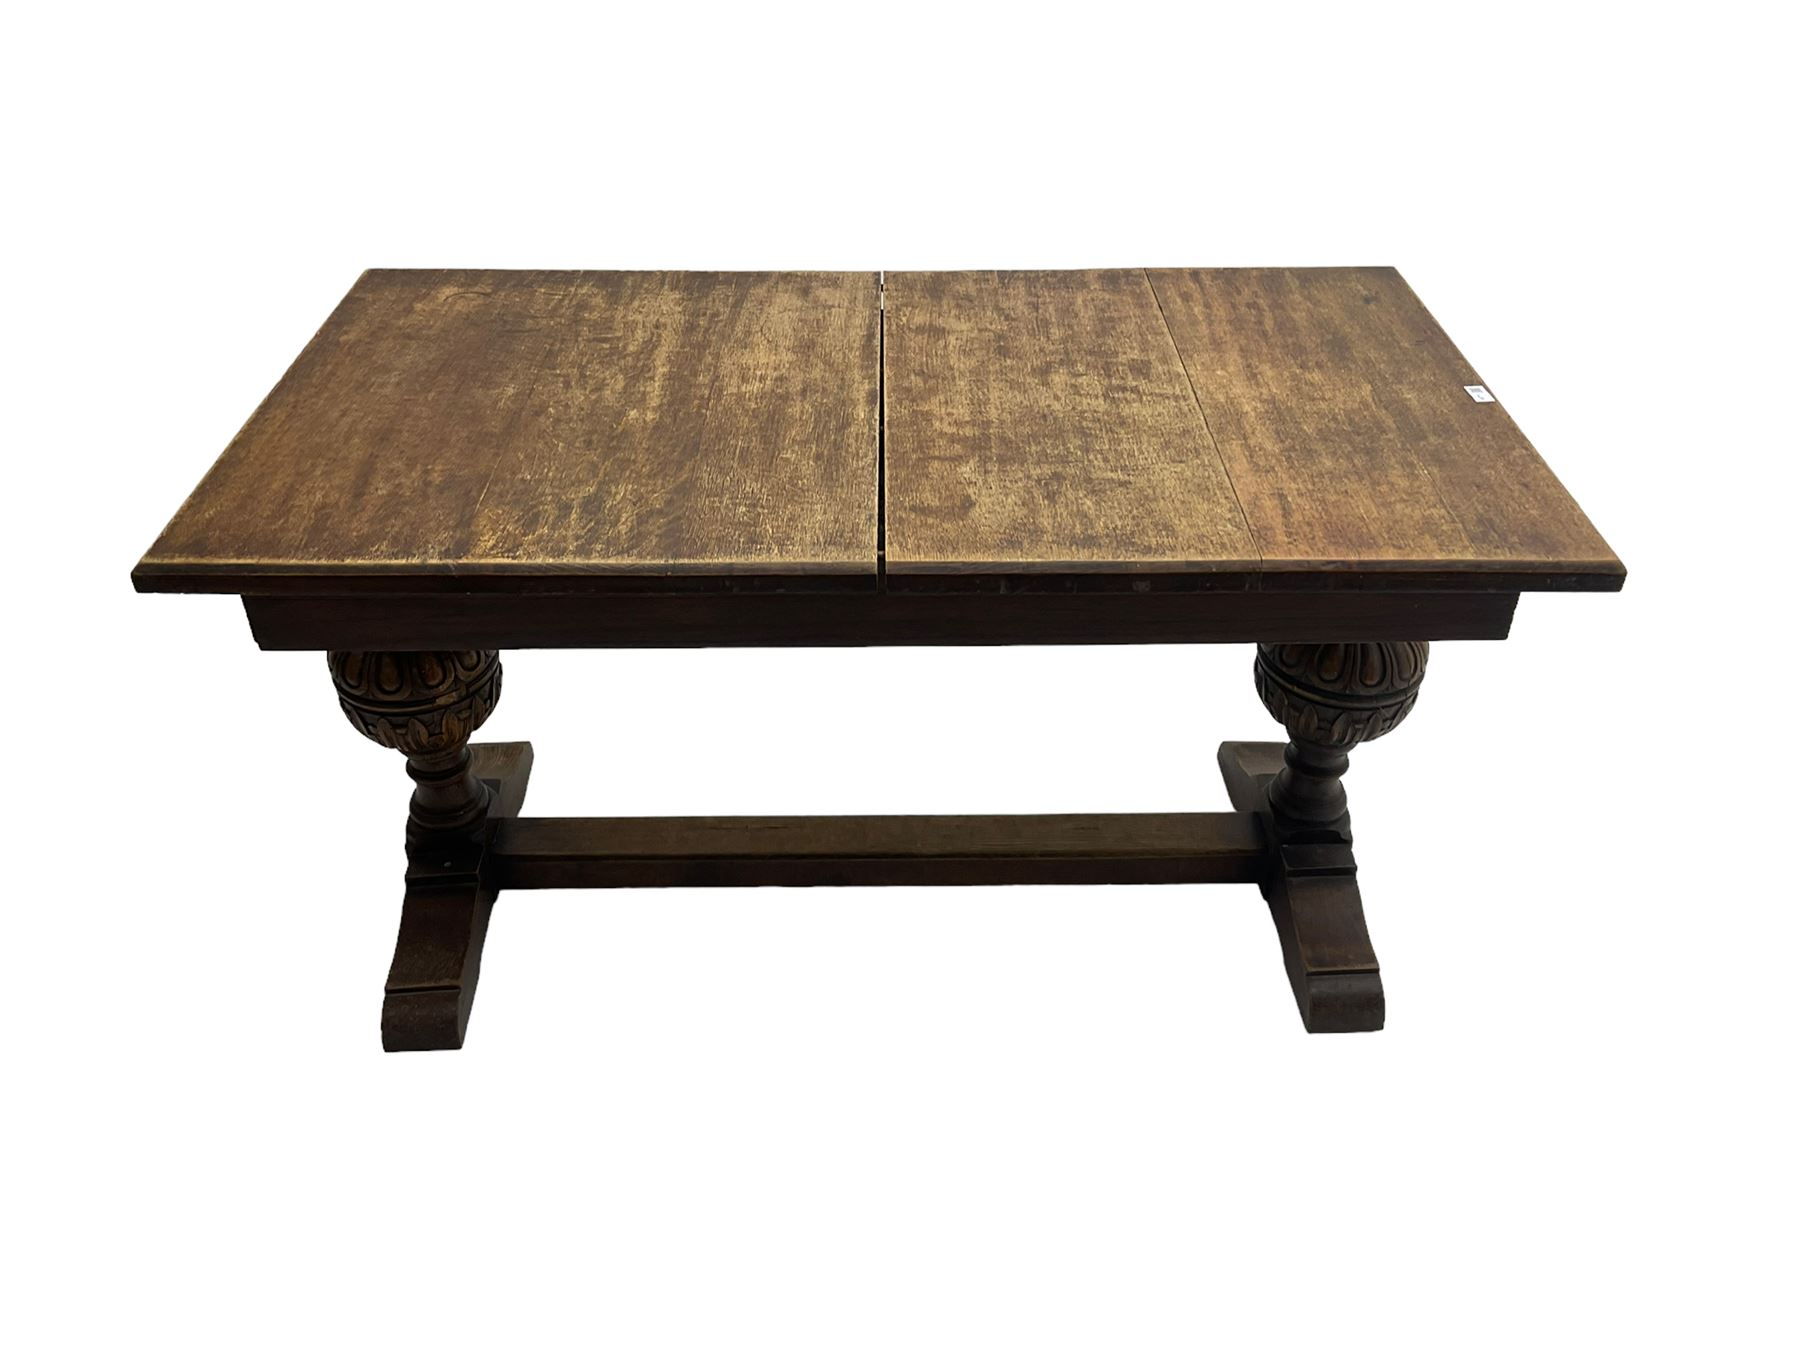 19th century oak extending dining table - Image 2 of 6